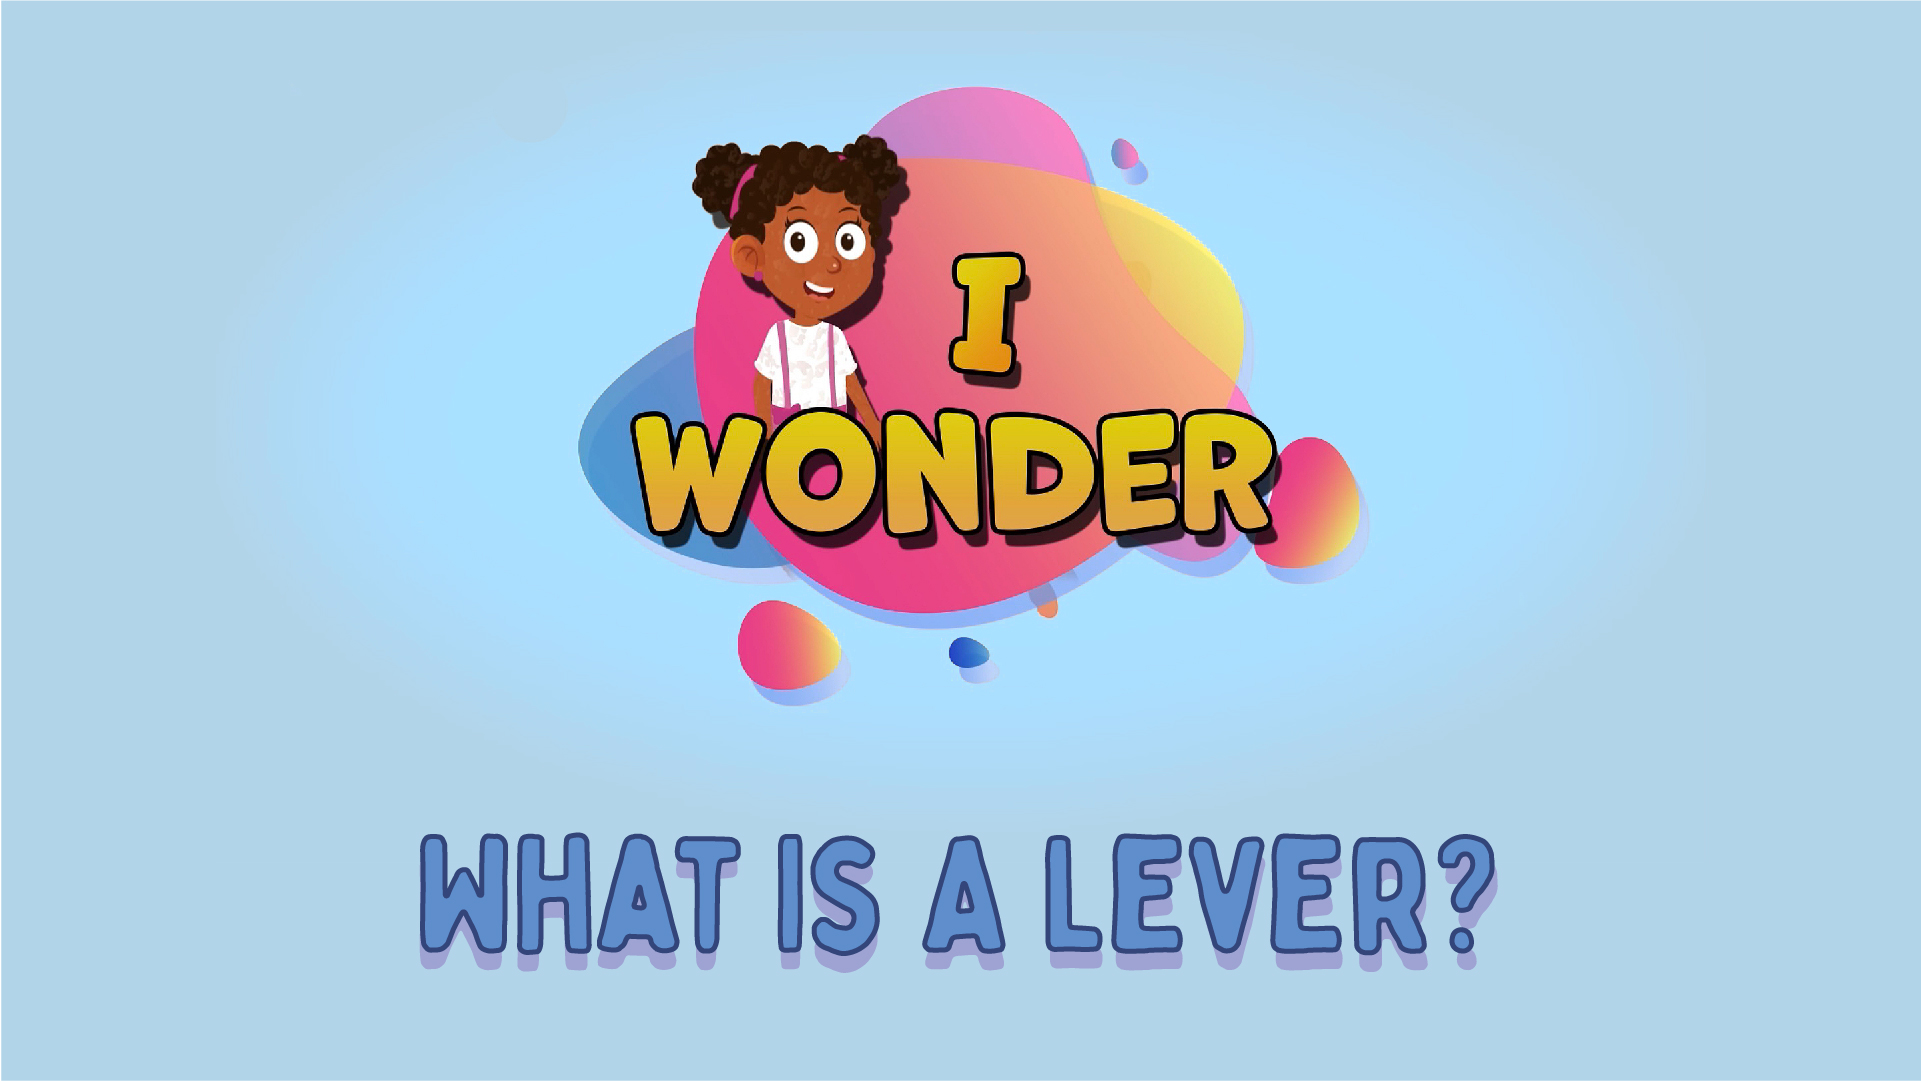 What Is A Lever?